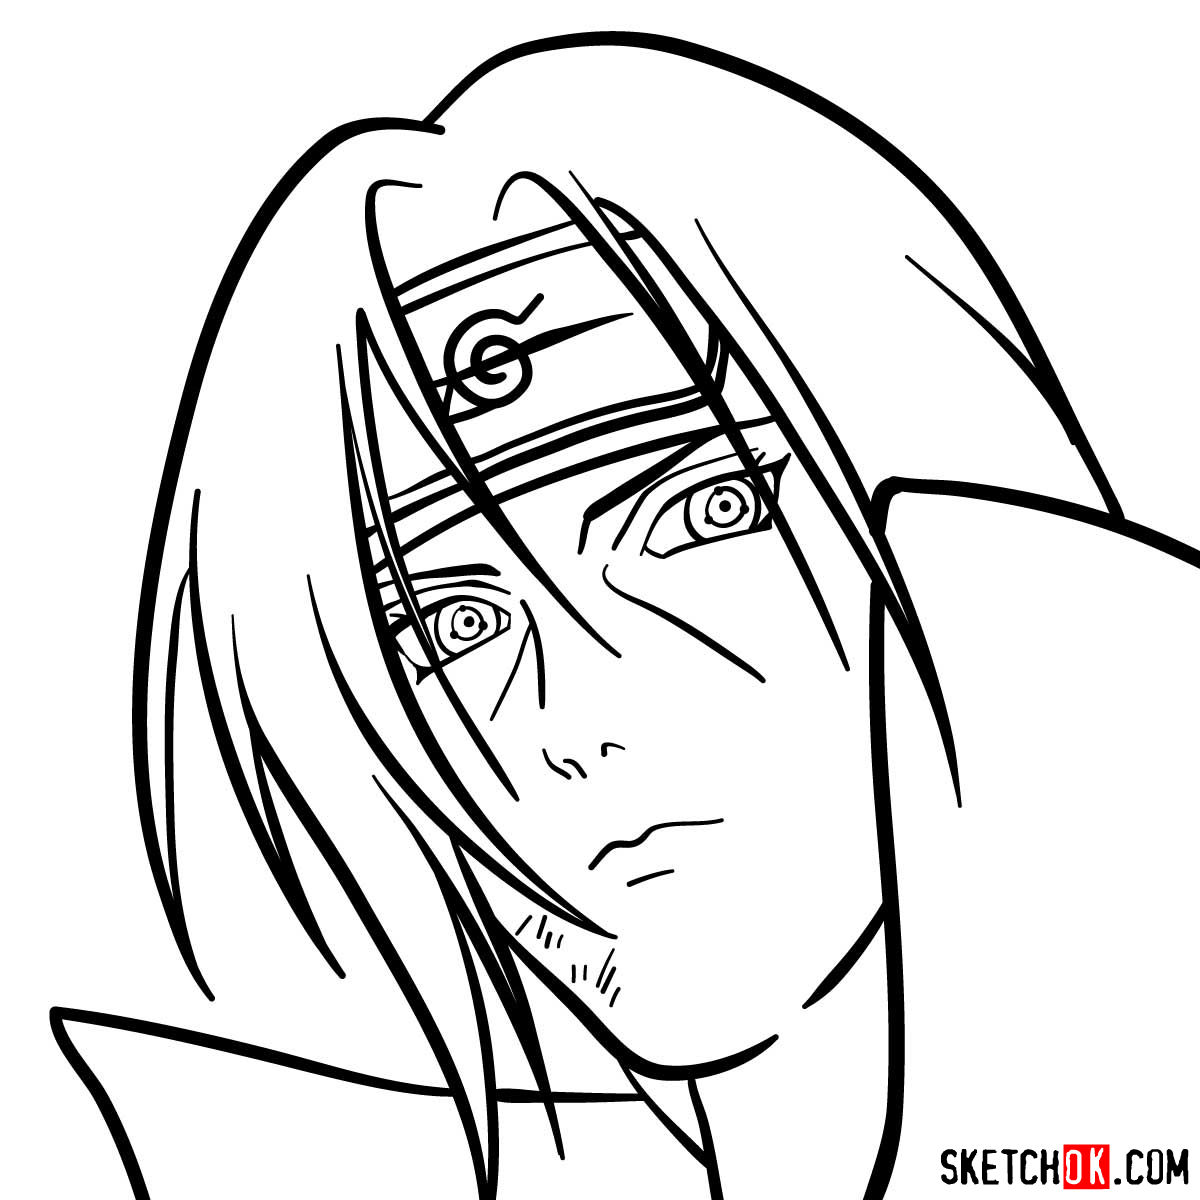 How to draw Itachi's face (Naruto anime) - step 10